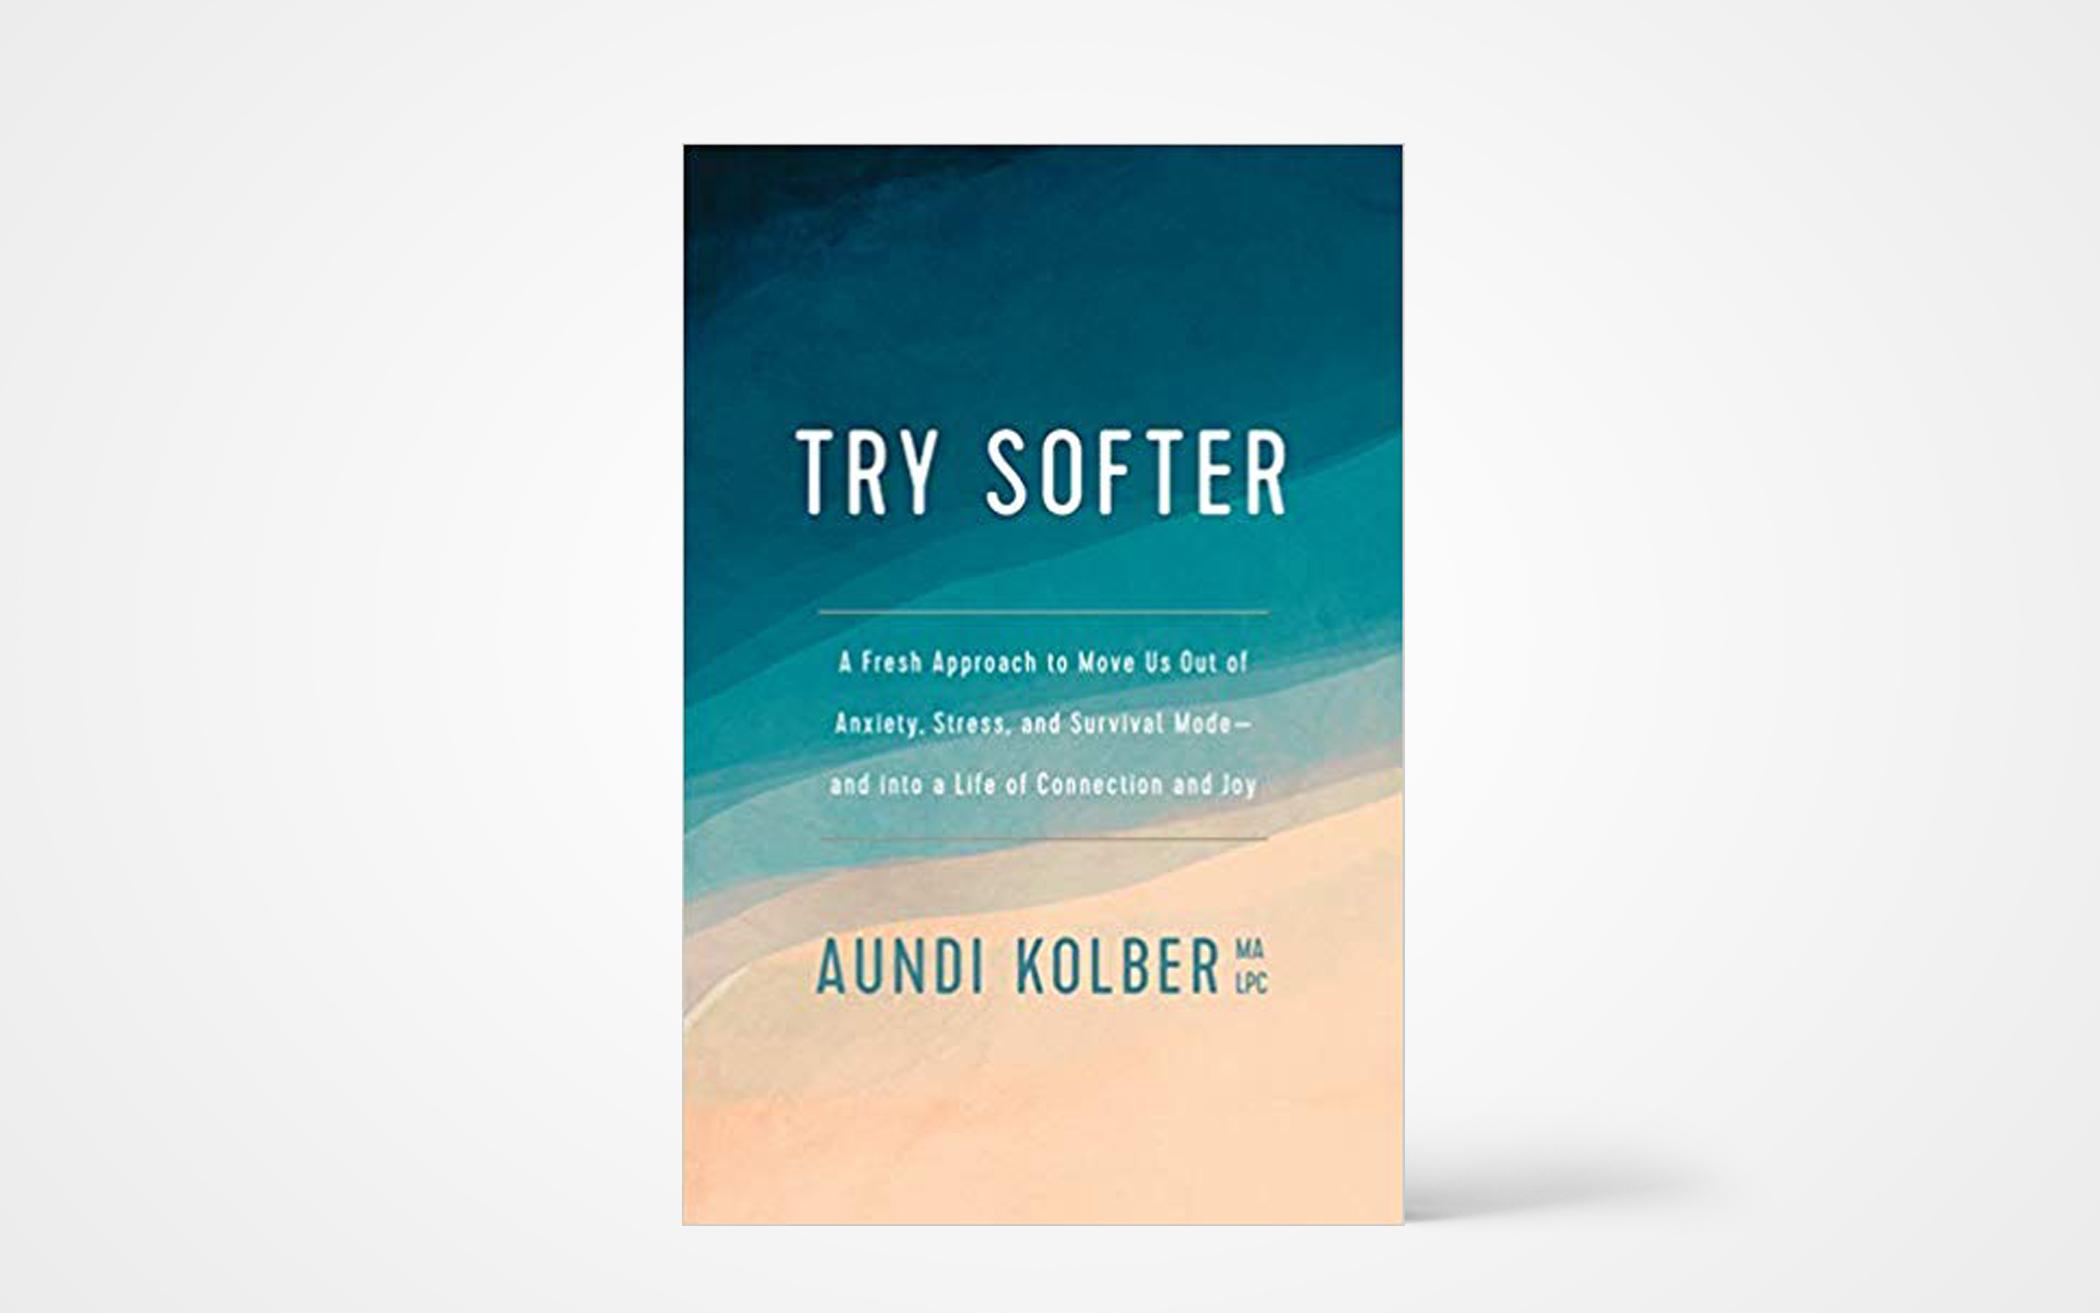 Try Softer: A Fresh Approach to Move Us Out of Anxiety, Stress, and Survival Mode—and into a Life of Connection and Joy